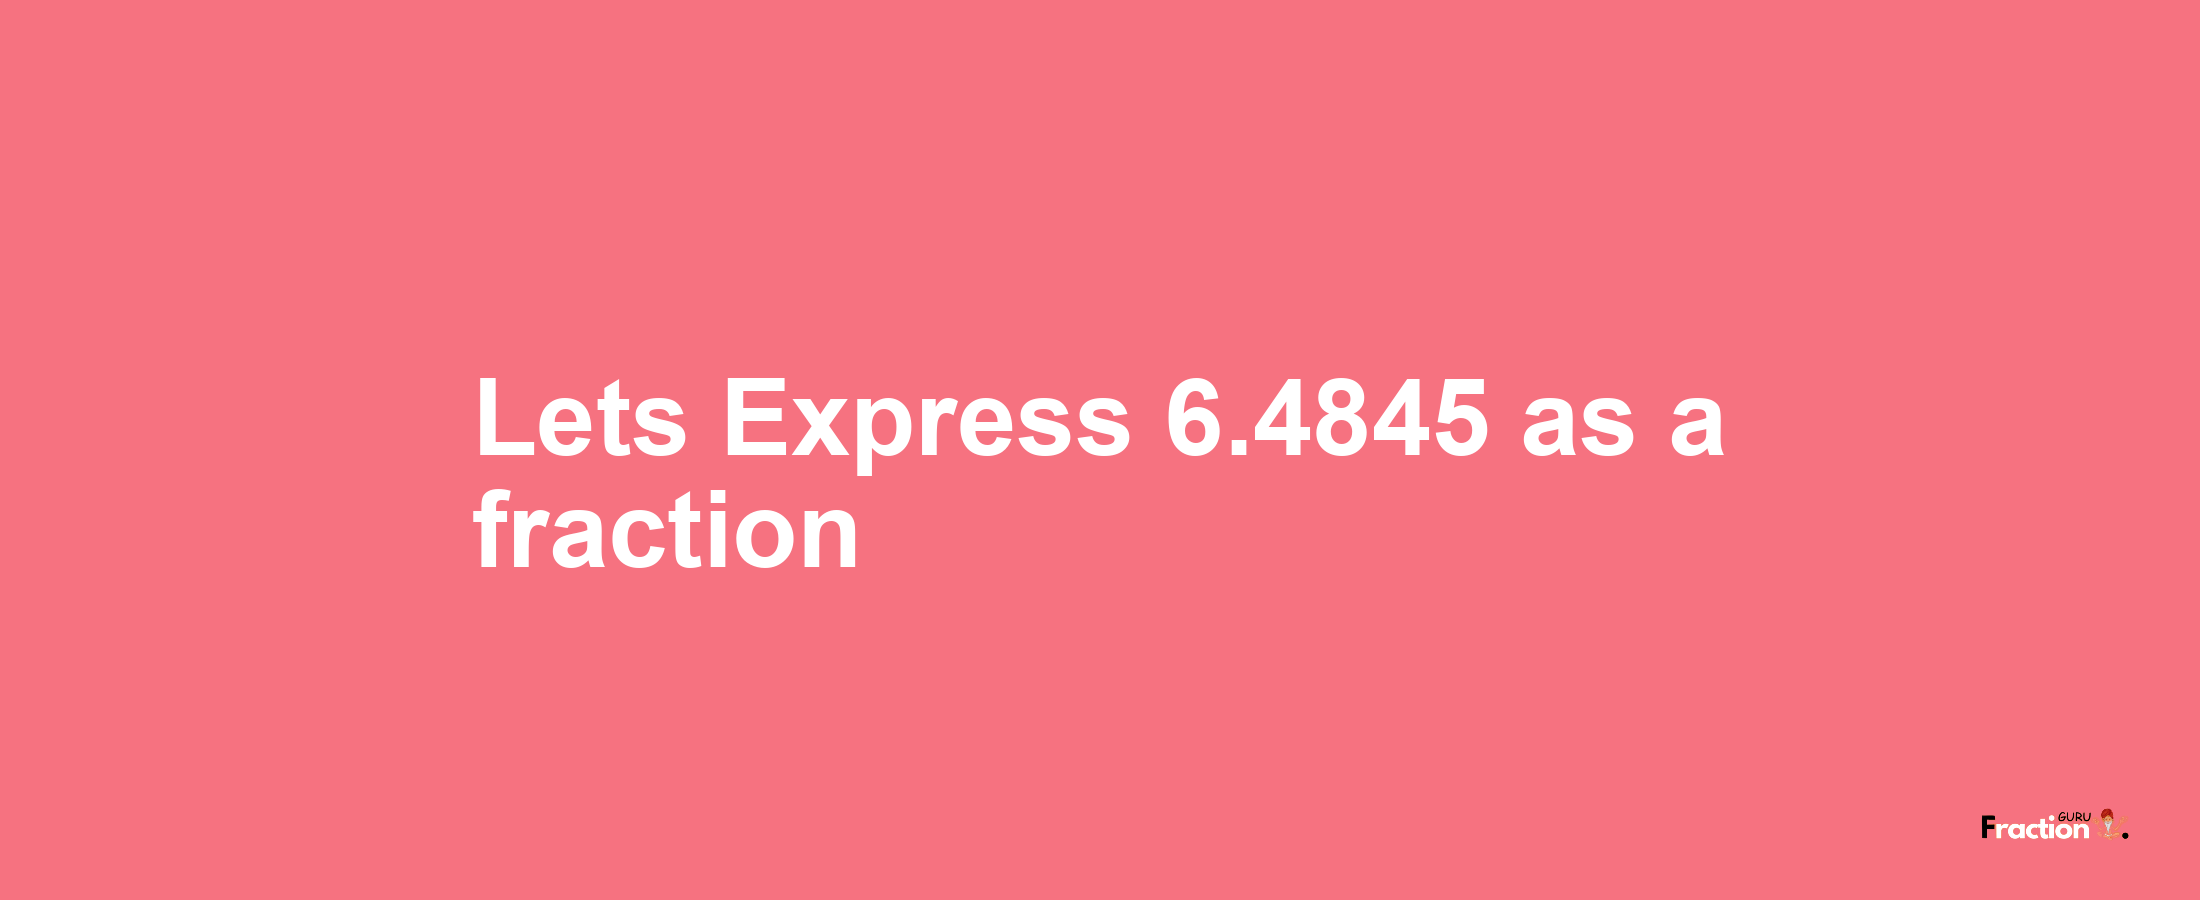 Lets Express 6.4845 as afraction